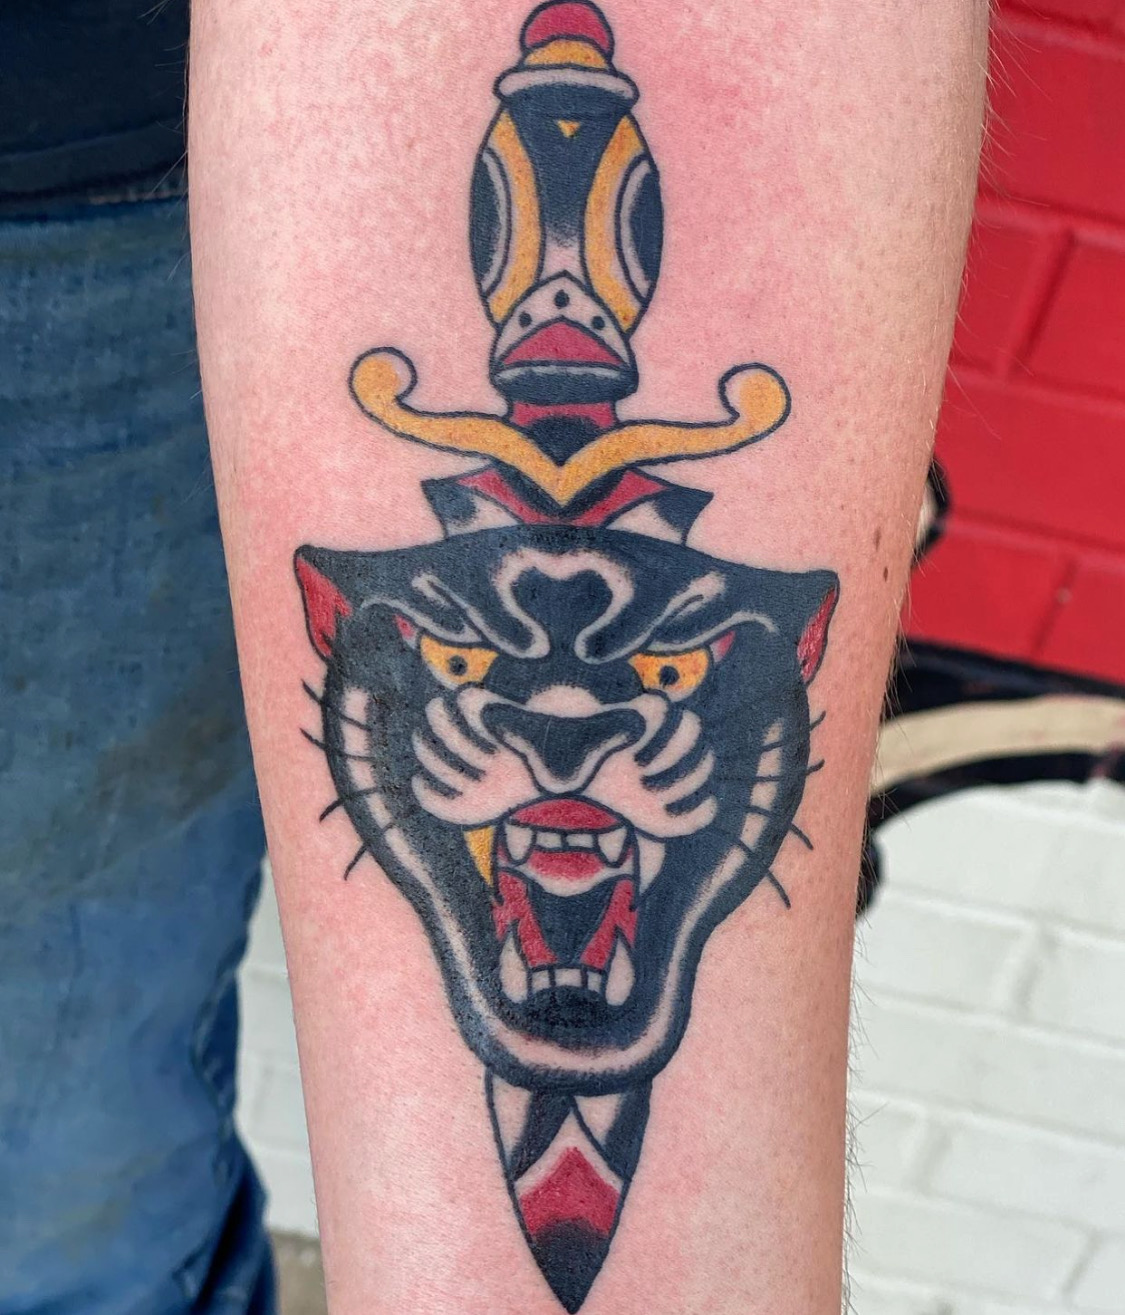 Black panther tattoo with a dagger from Dallas tattoo shop